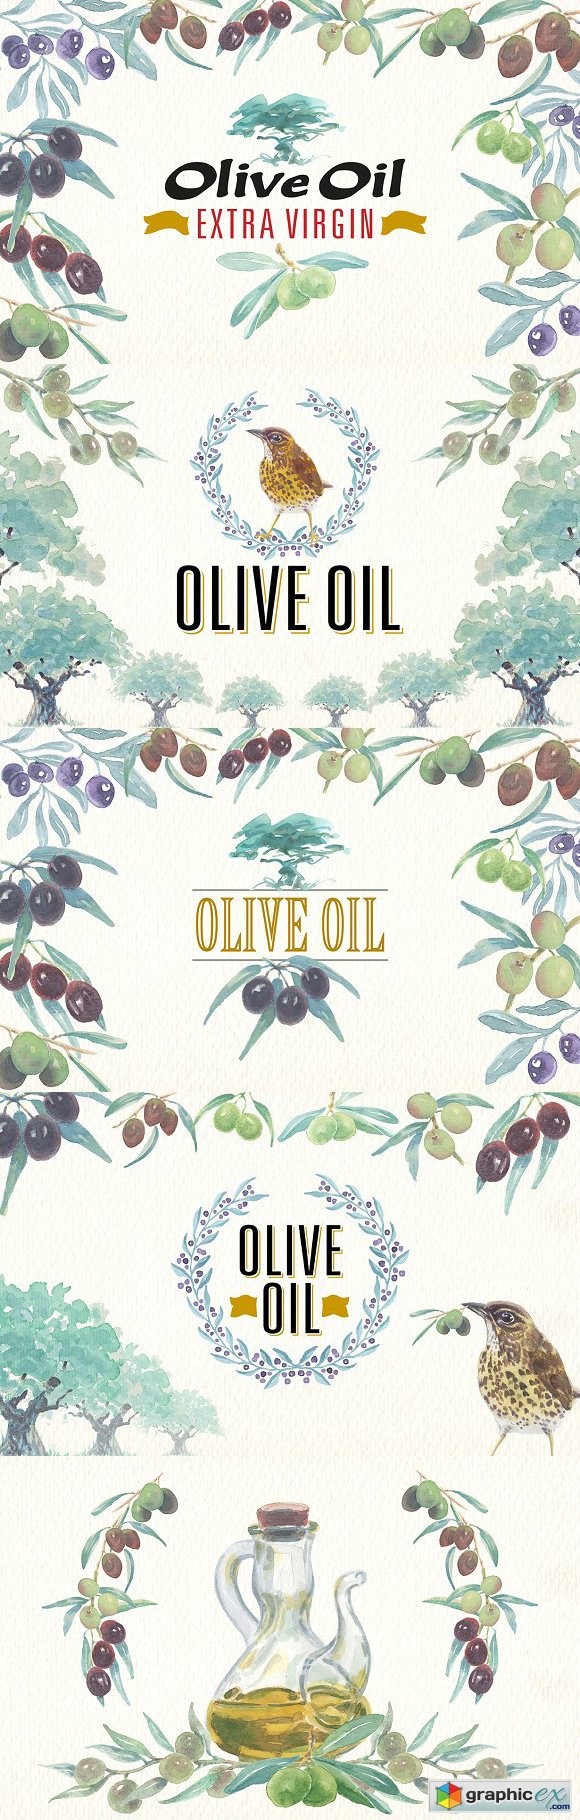 Watercolor olive oil clipart